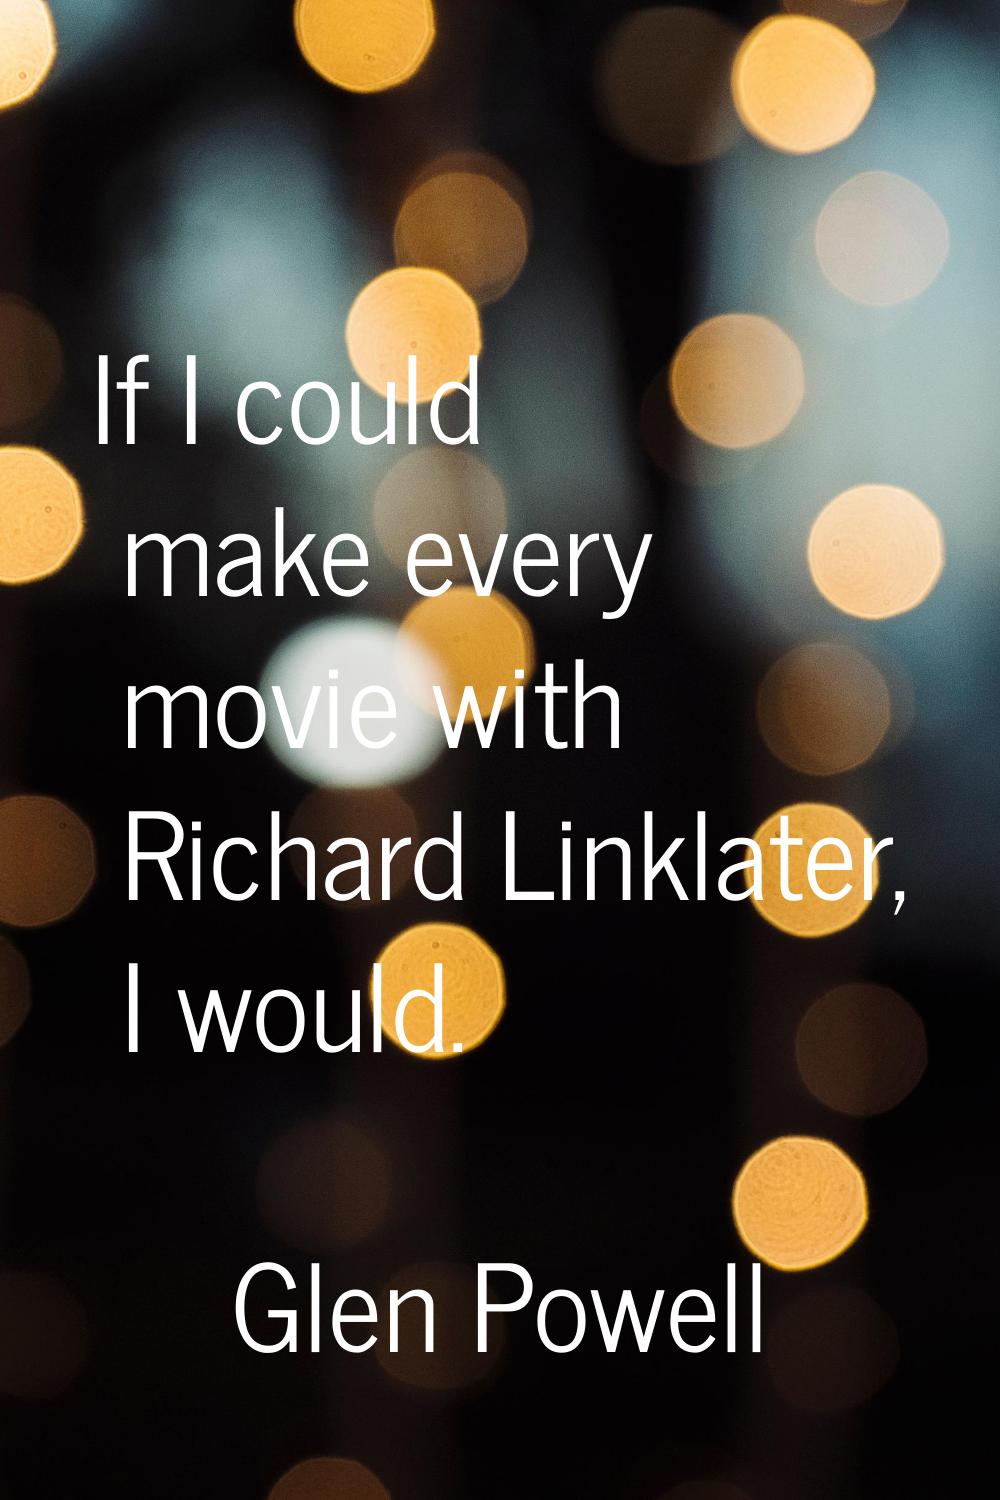 If I could make every movie with Richard Linklater, I would.